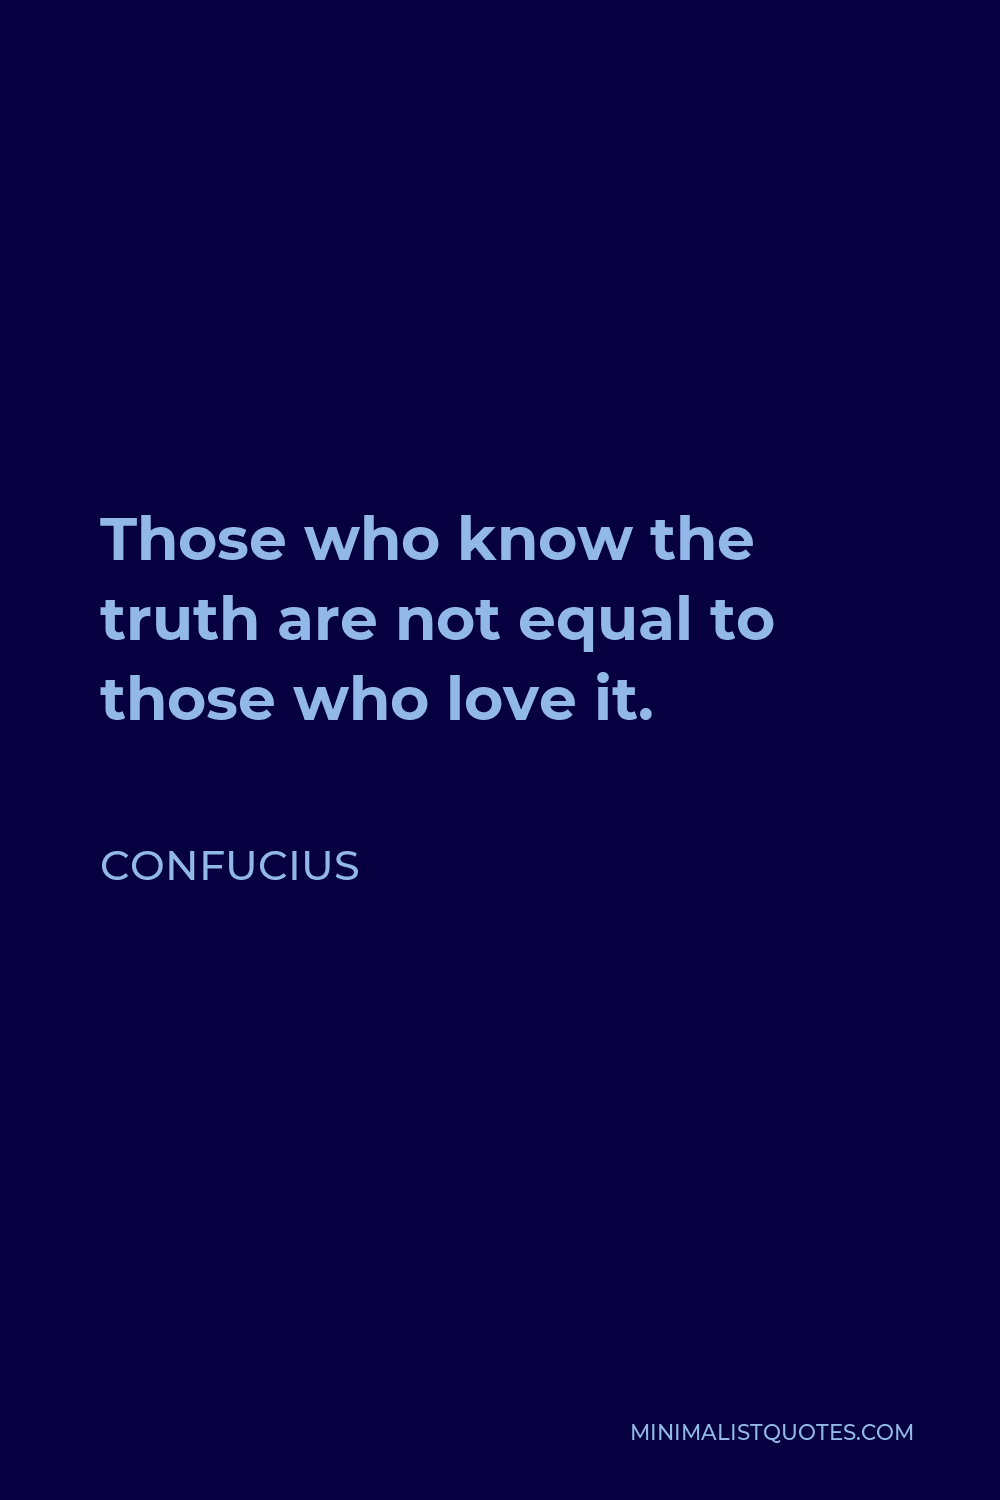 Confucius Quote - Those who know the truth are not equal to those who love it.